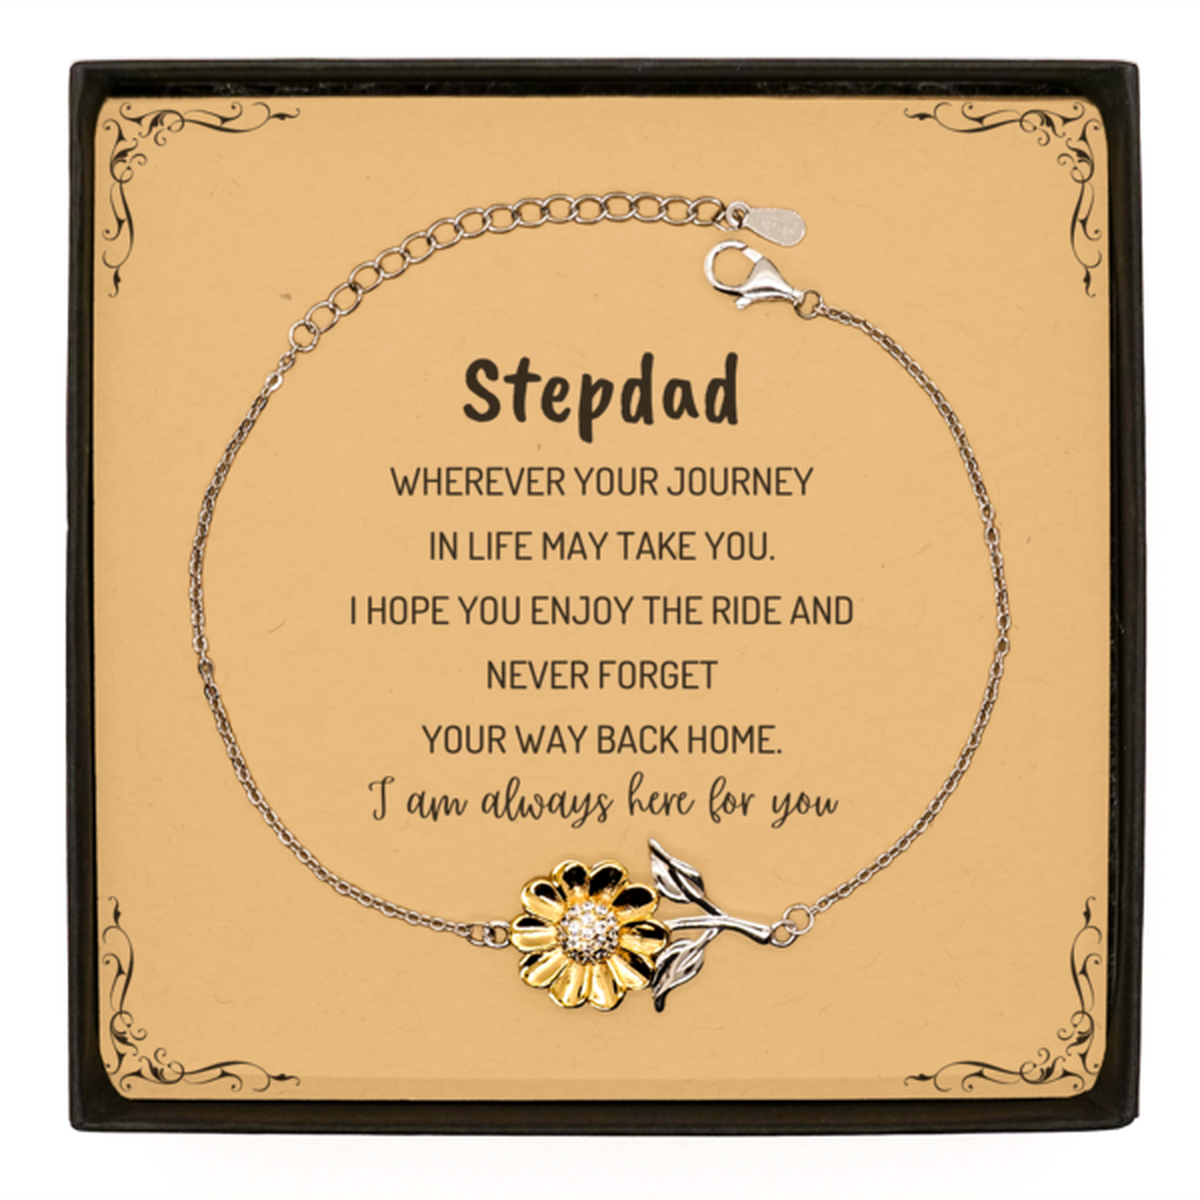 Stepdad wherever your journey in life may take you, I am always here for you Stepdad Sunflower Bracelet, Awesome Christmas Gifts For Stepdad Message Card, Stepdad Birthday Gifts for Men Women Family Loved One